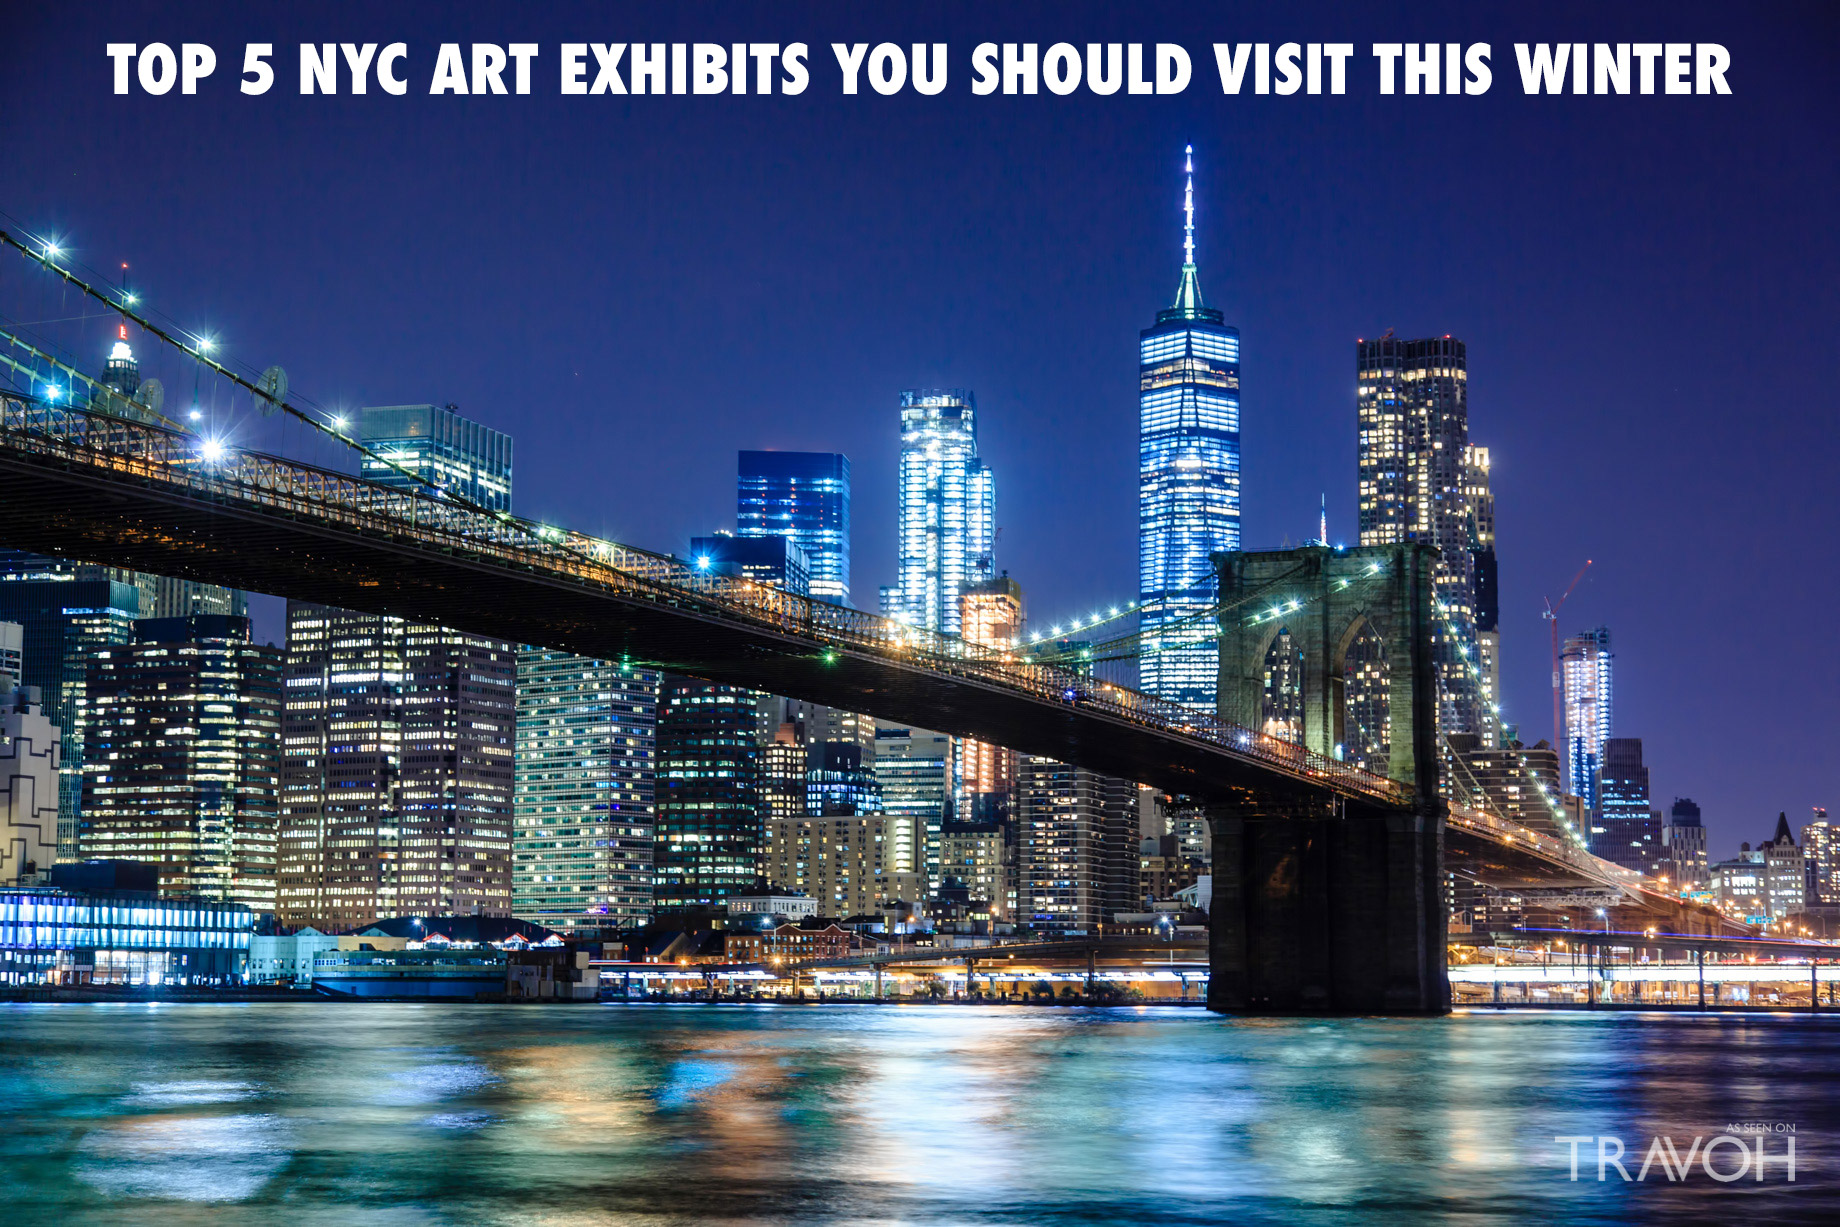 Top 5 New York City Art Exhibits You Should Visit This Winter